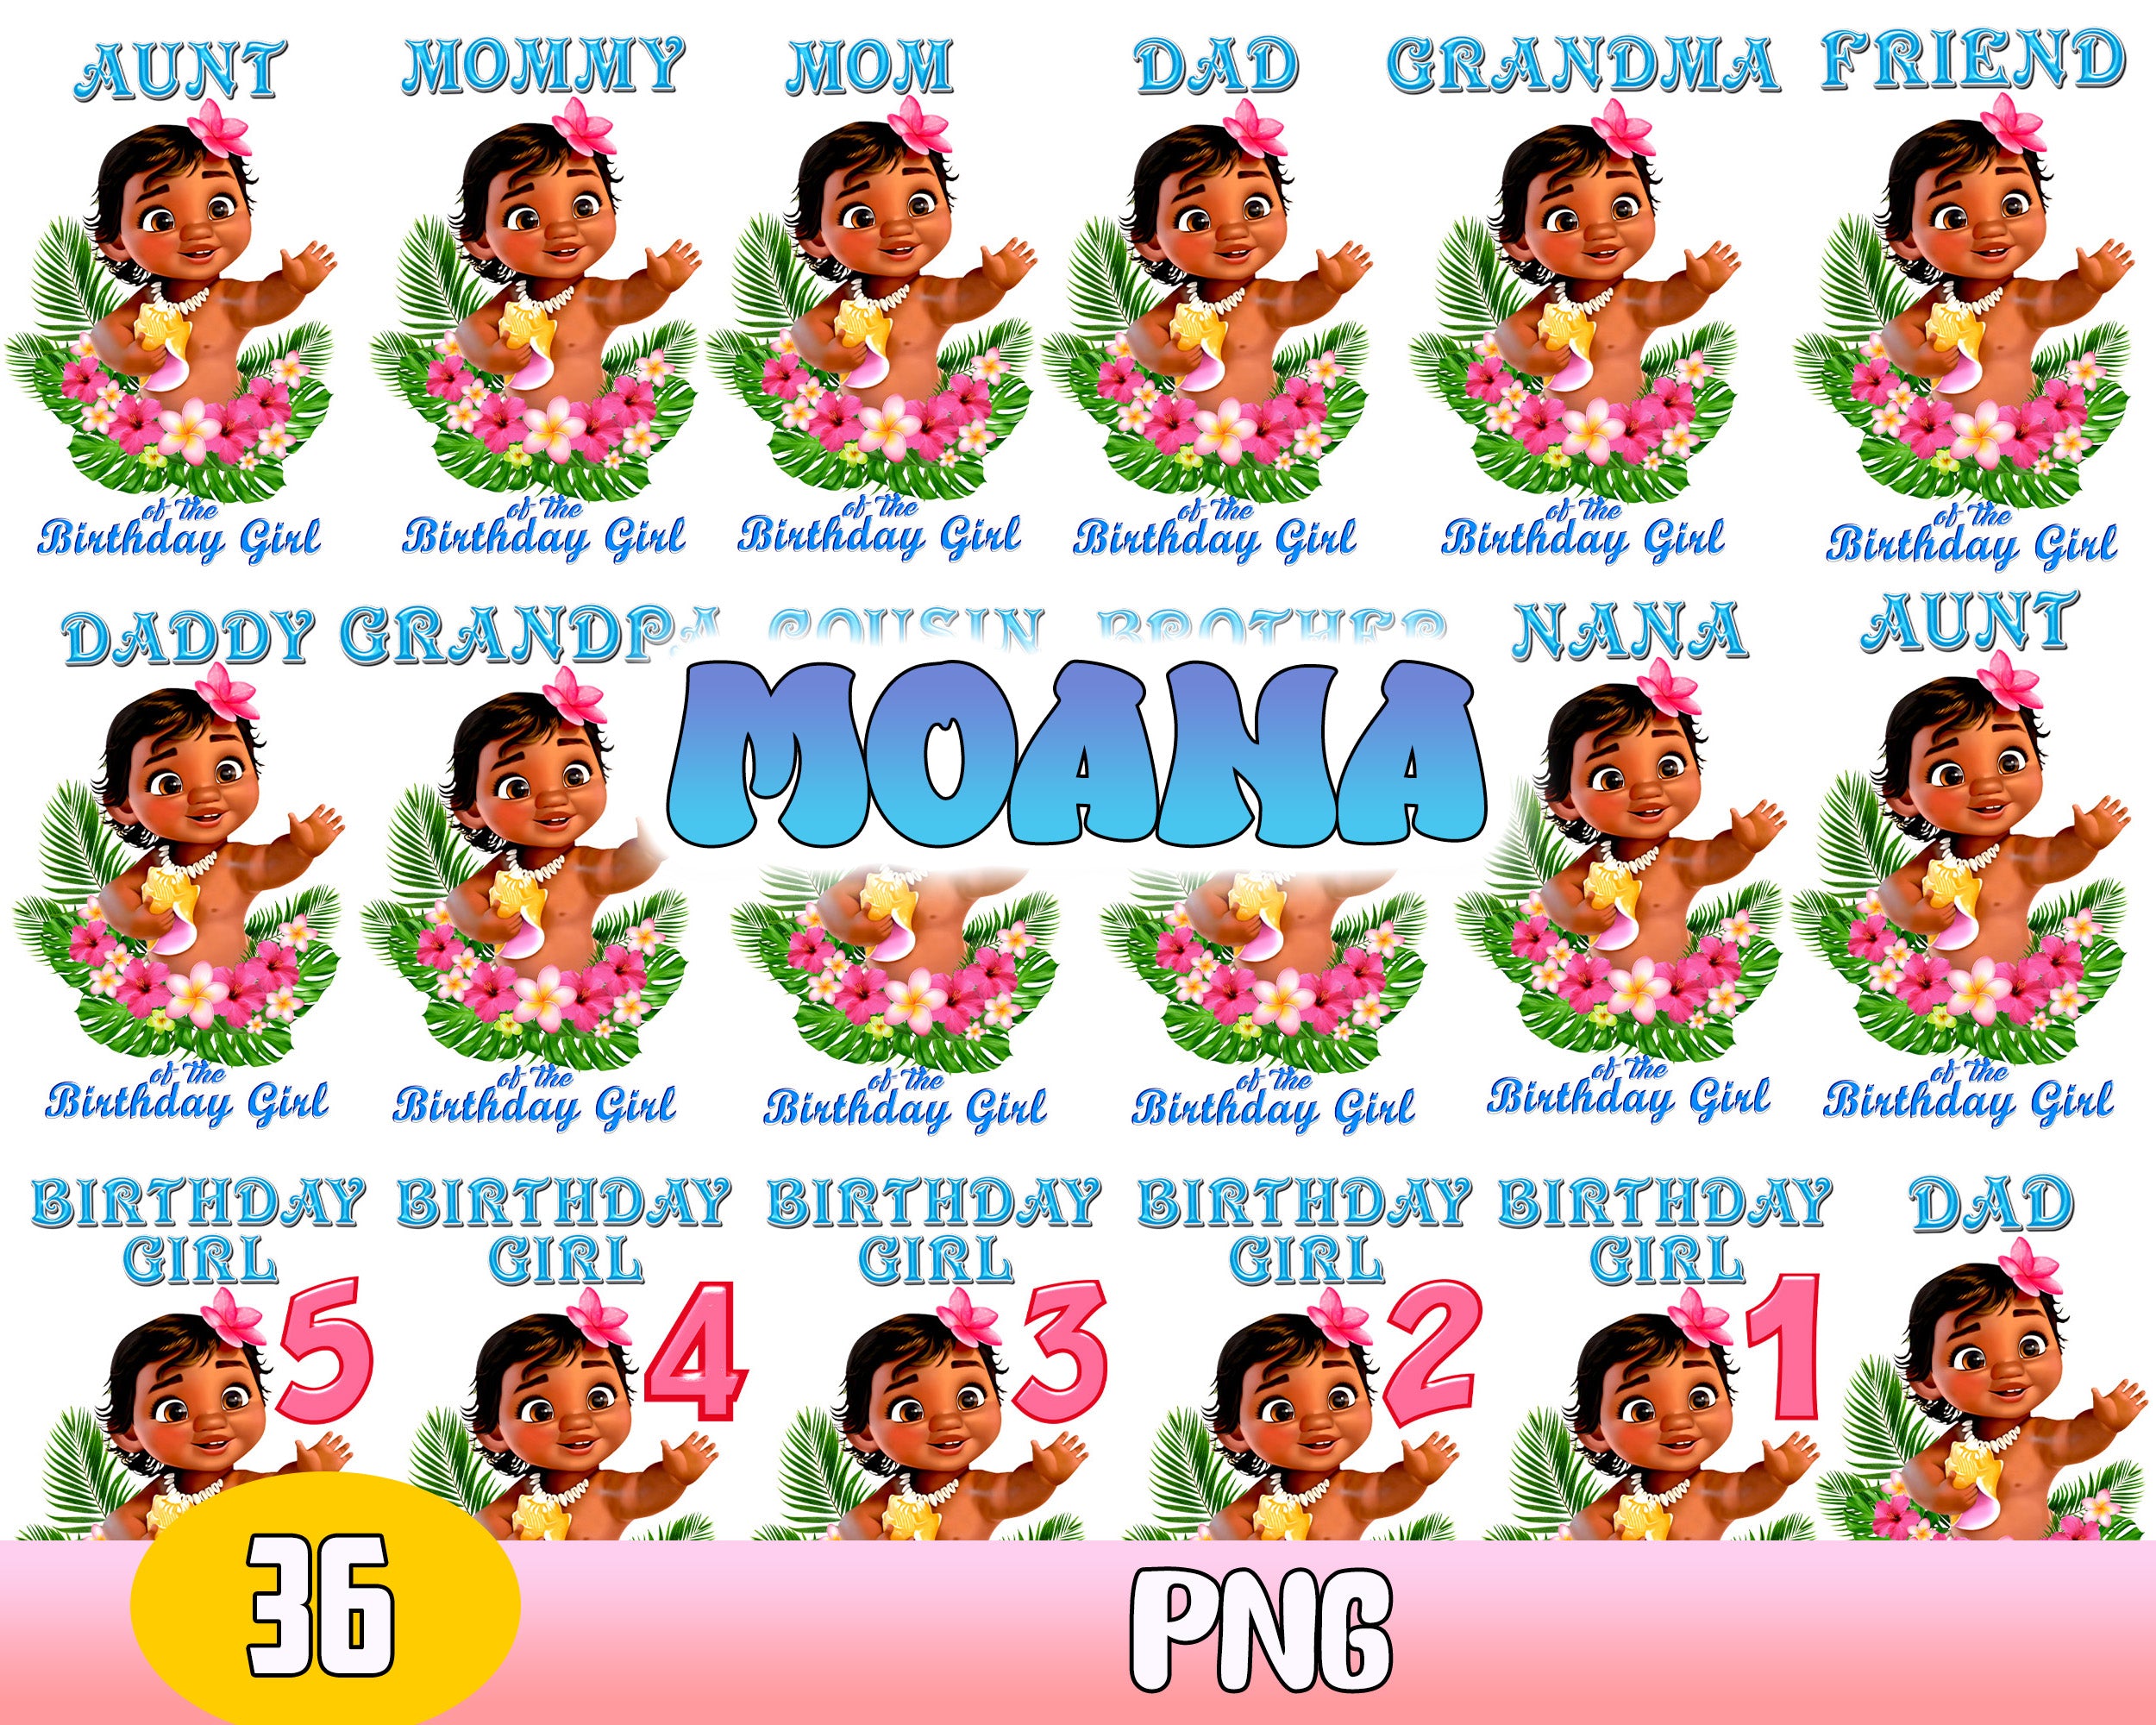 Moana png clip art, Disney Princess PNG download Baby Princess Moana digital image download for mug, tumbler, sticker or any sublimation